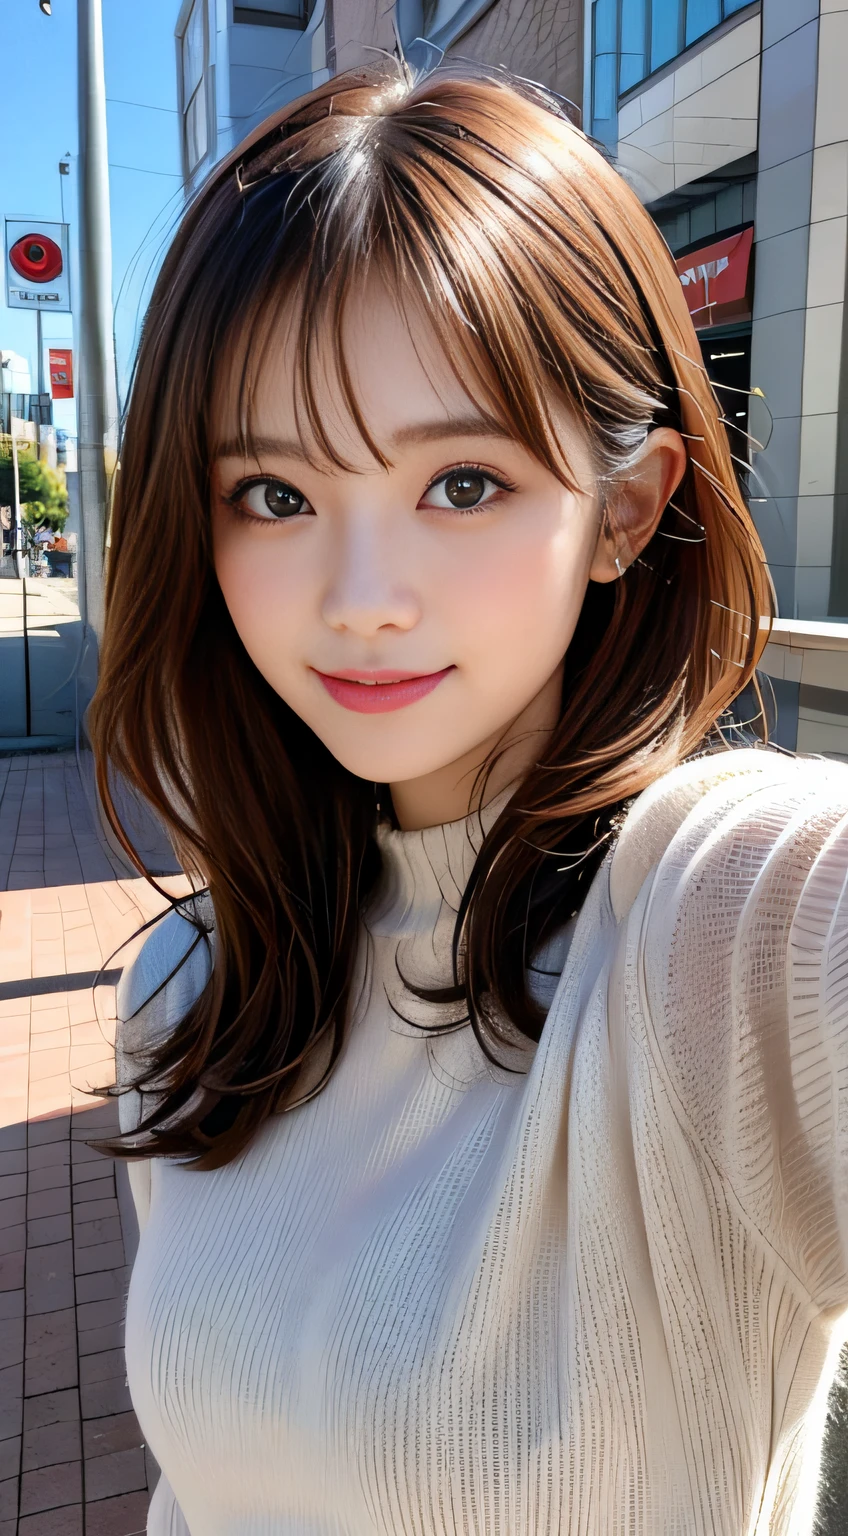 masutepiece, Best Quality, Illustration, Ultra-detailed, finely detail, hight resolution, 8K Wallpaper, Perfect dynamic composition, Beautiful detailed eyes, Winter casual wear,Medium Hair,Small breasts natural color lip, Bold sexy poses,Smile,Harajuku、20 years girl、Cute、Sexy shot looking at camera